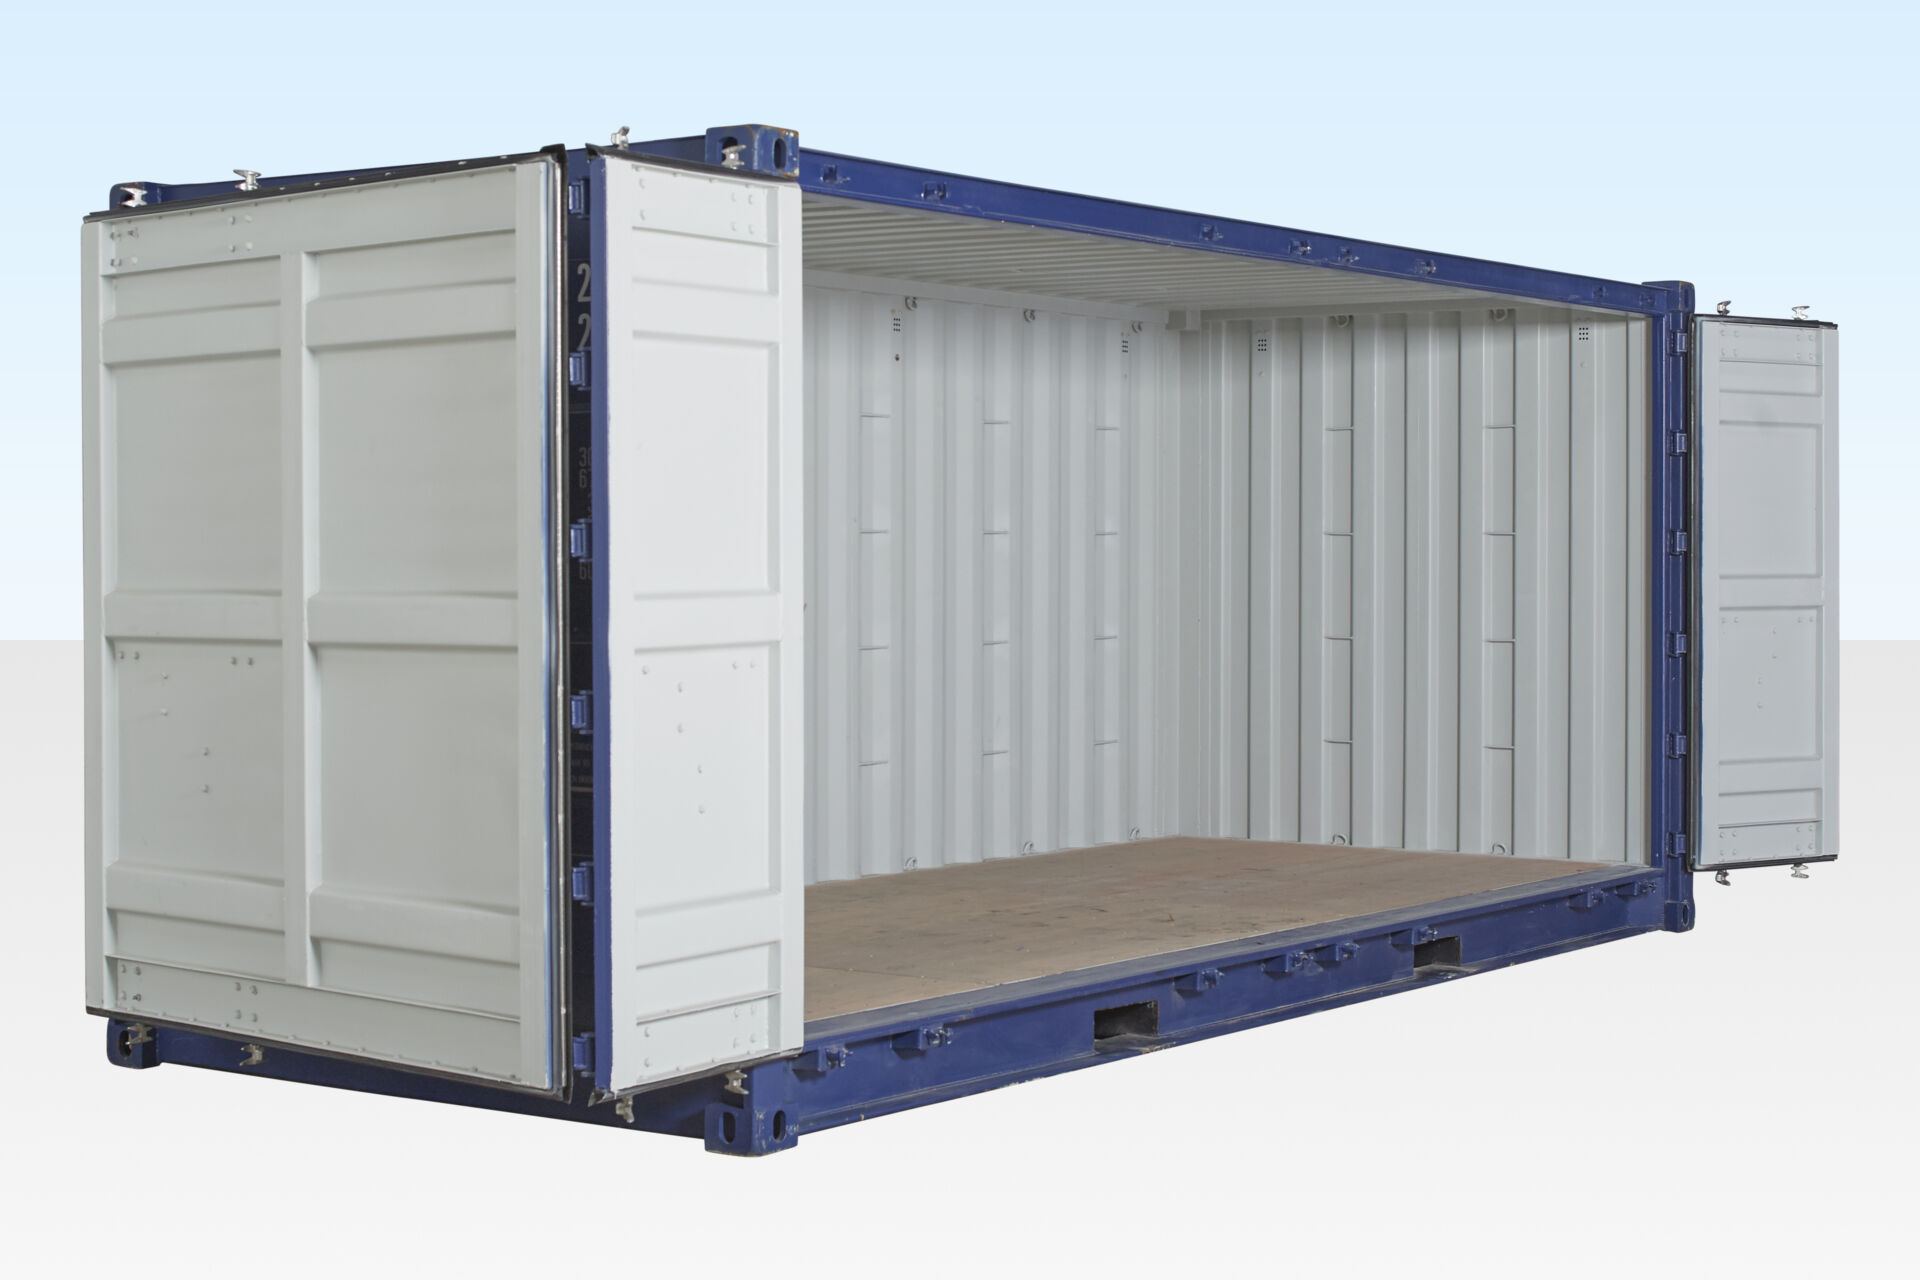 BUY 20FT OPEN SIDE / FULL SIDE ACCESS CONTAINER AT WWW.HELLOCONTAINERS.COM